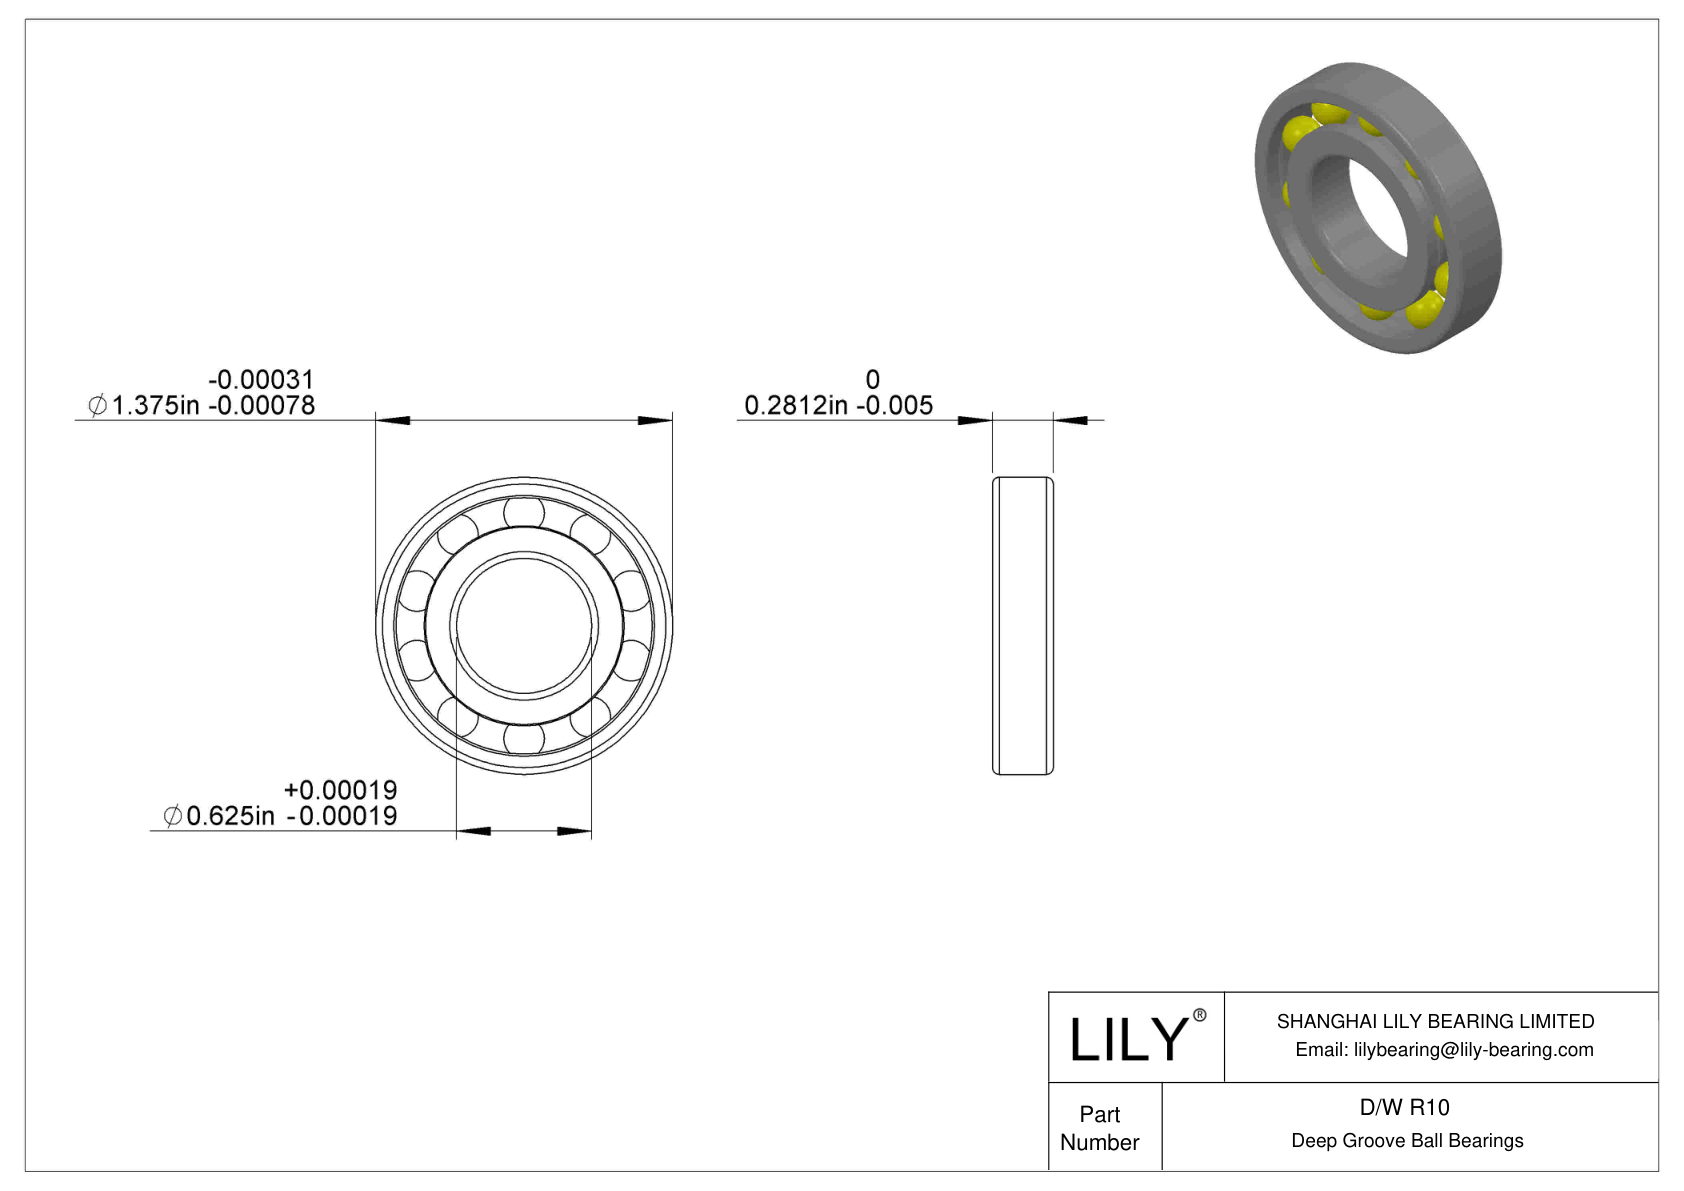 D/W R10 Stainless Steel Deep Groove Ball Bearings cad drawing